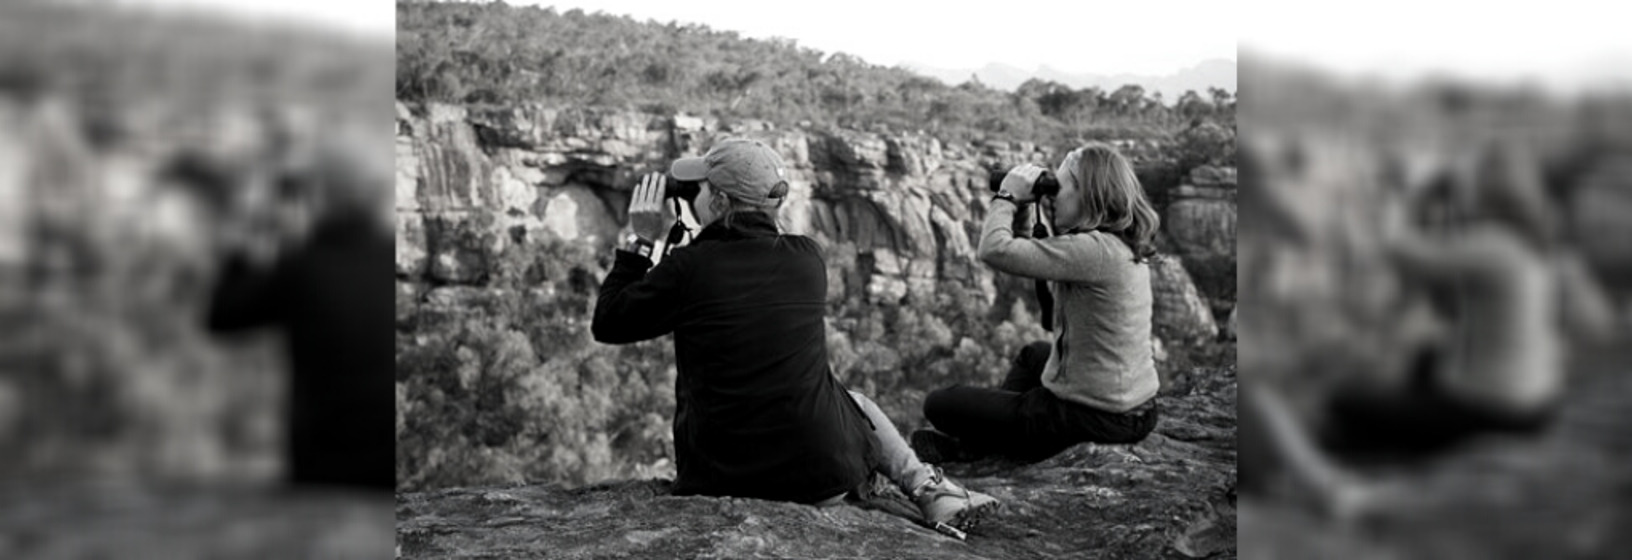 Two women sit high up on a rock and look out into the sprawling landscape through binoculars.